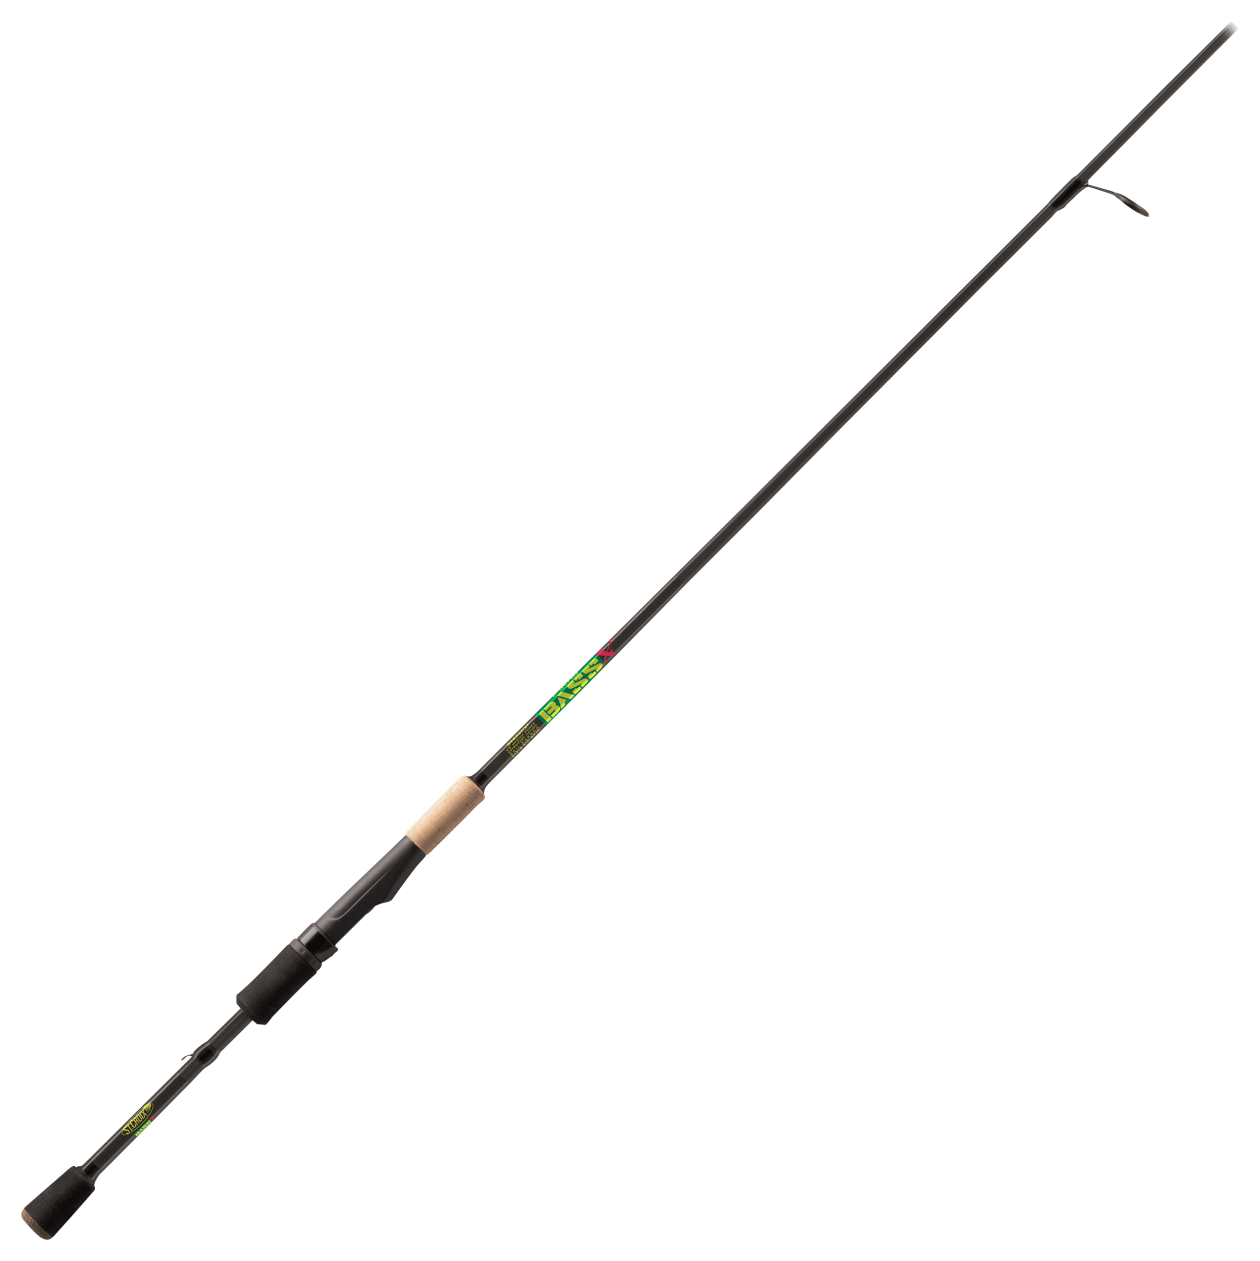 St. Croix Bass X Spinning Rod - Hamilton Bait and Tackle